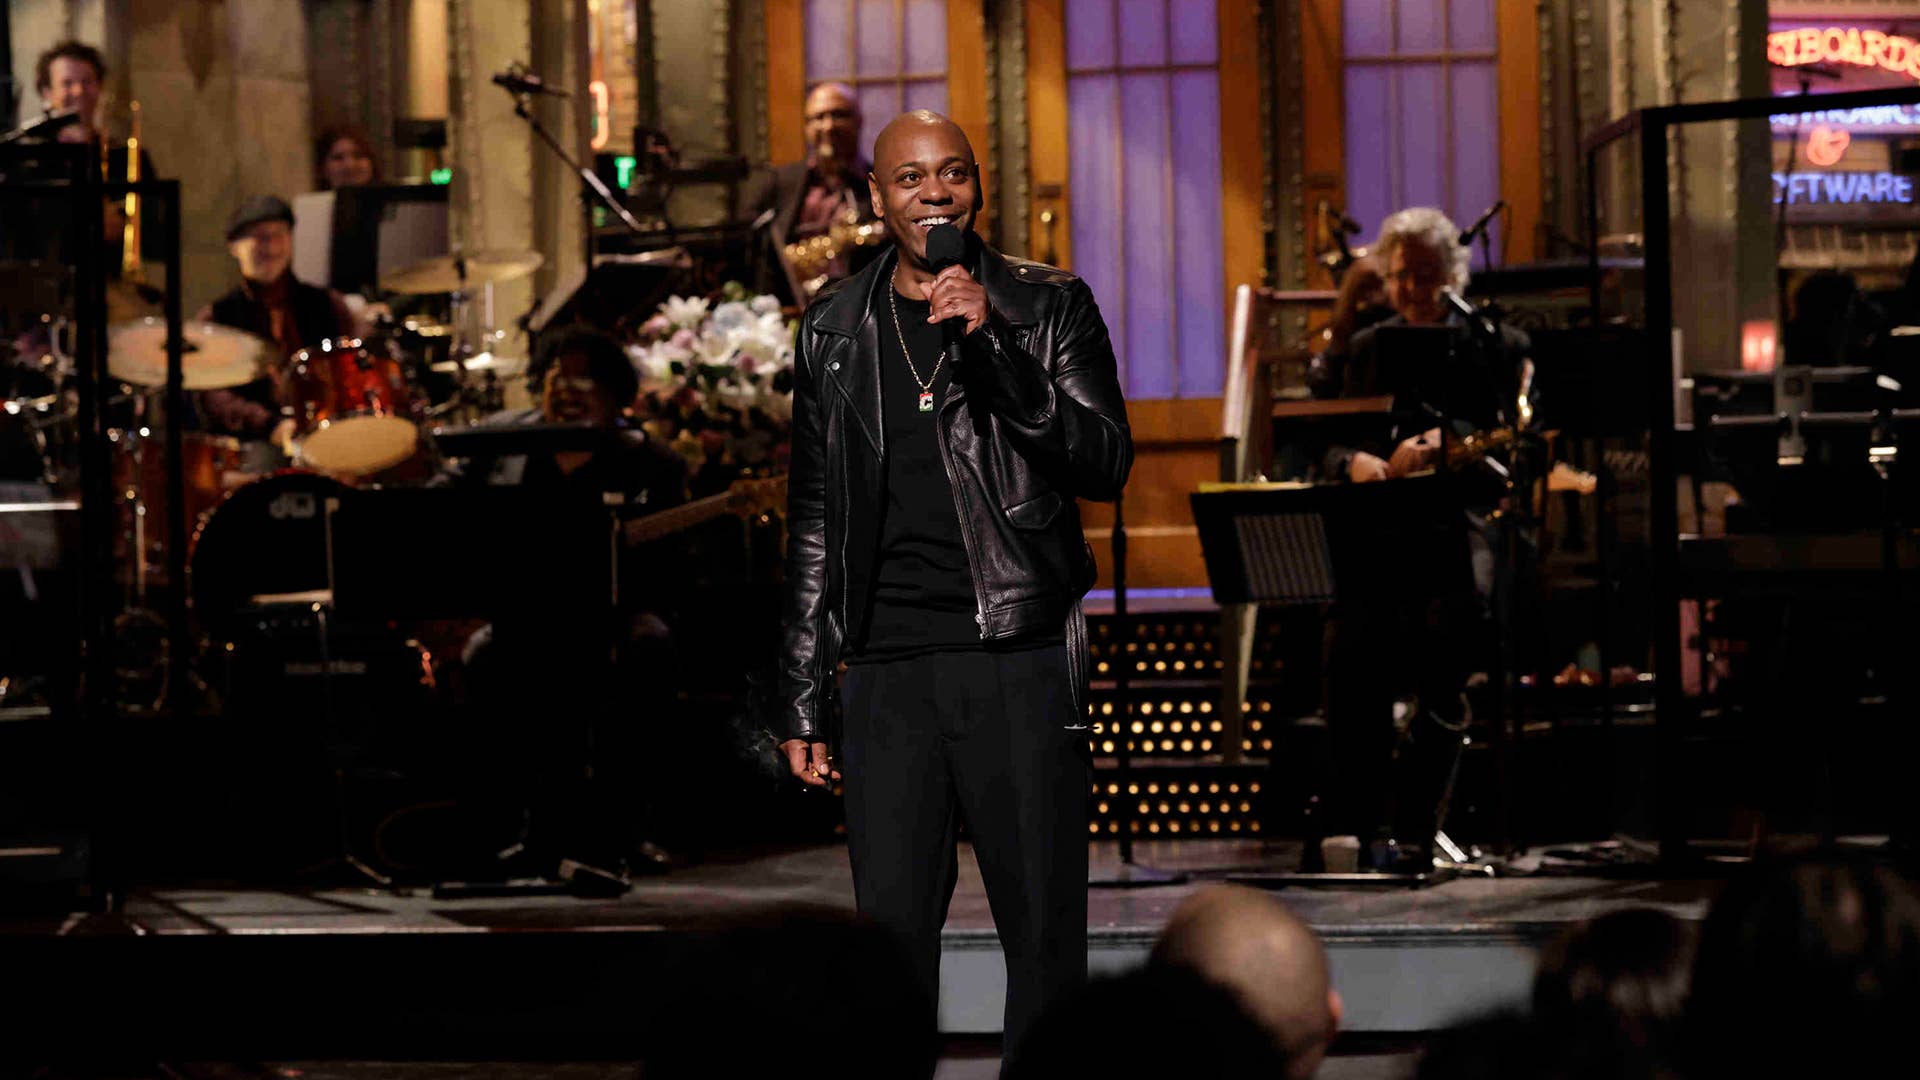 Dave Chappelle pictured during the Saturday Night Live monologue